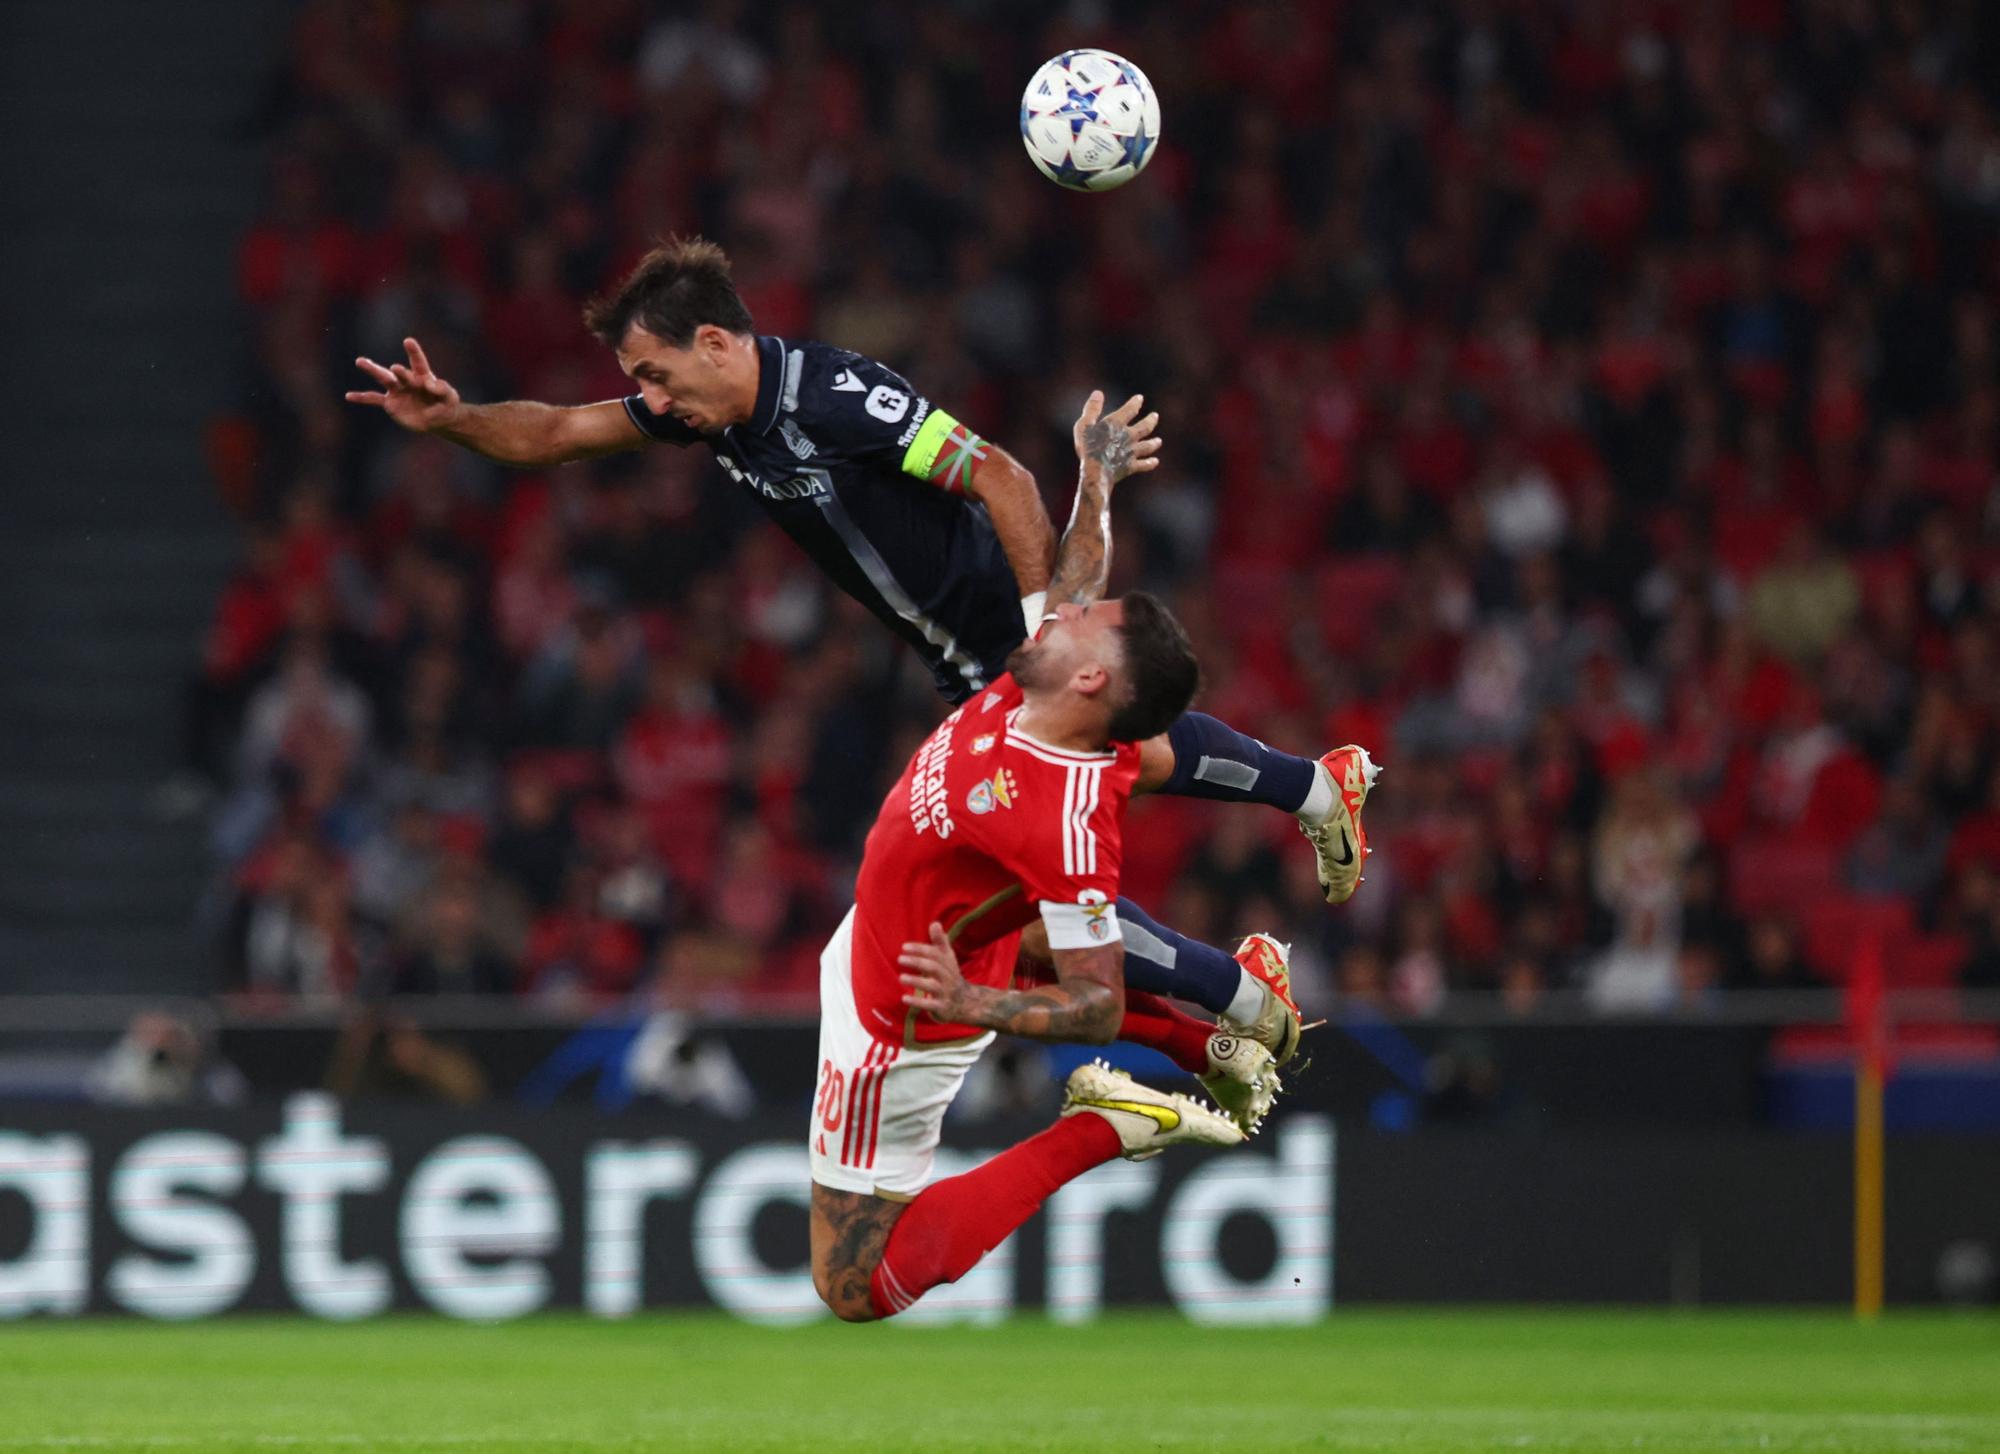 Champions League - Group D - Benfica v Real Sociedad